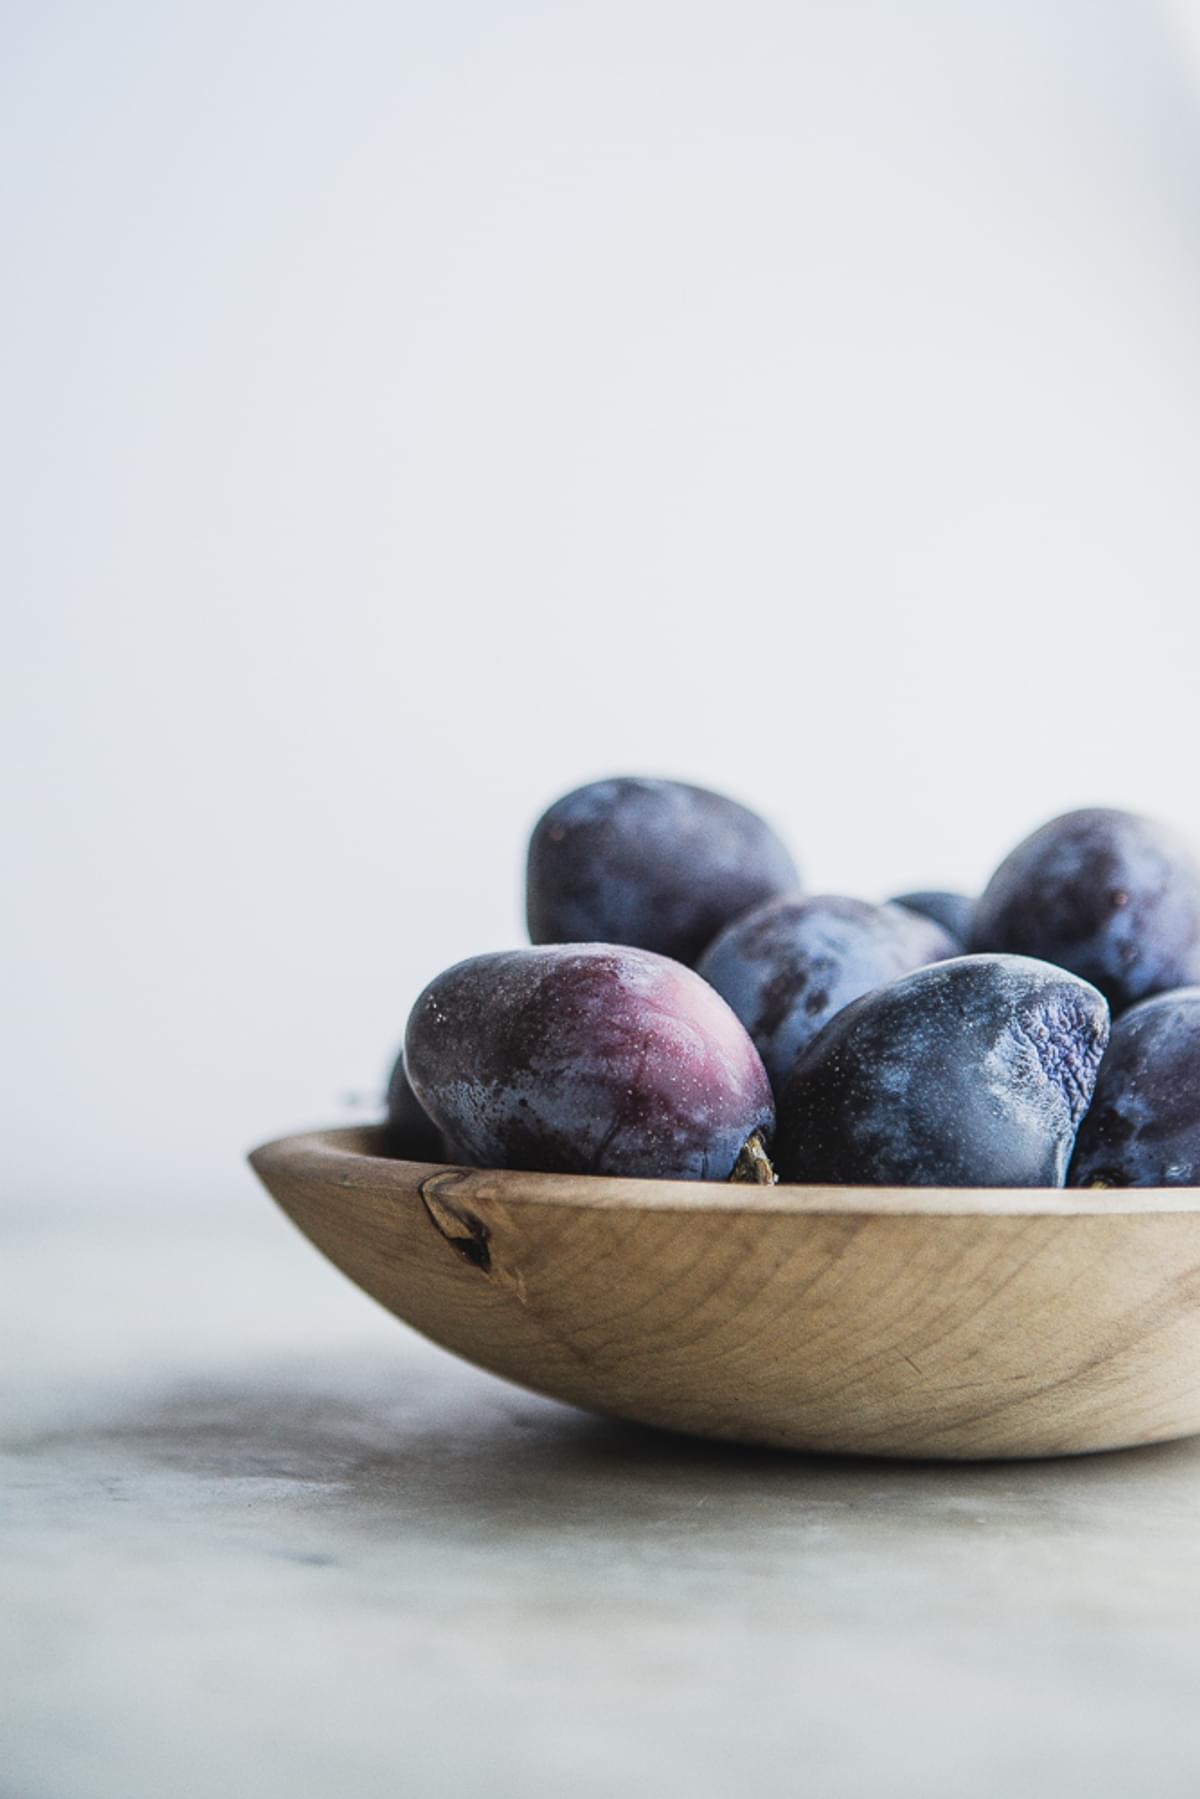 A wooden bowl filled with Italian plums